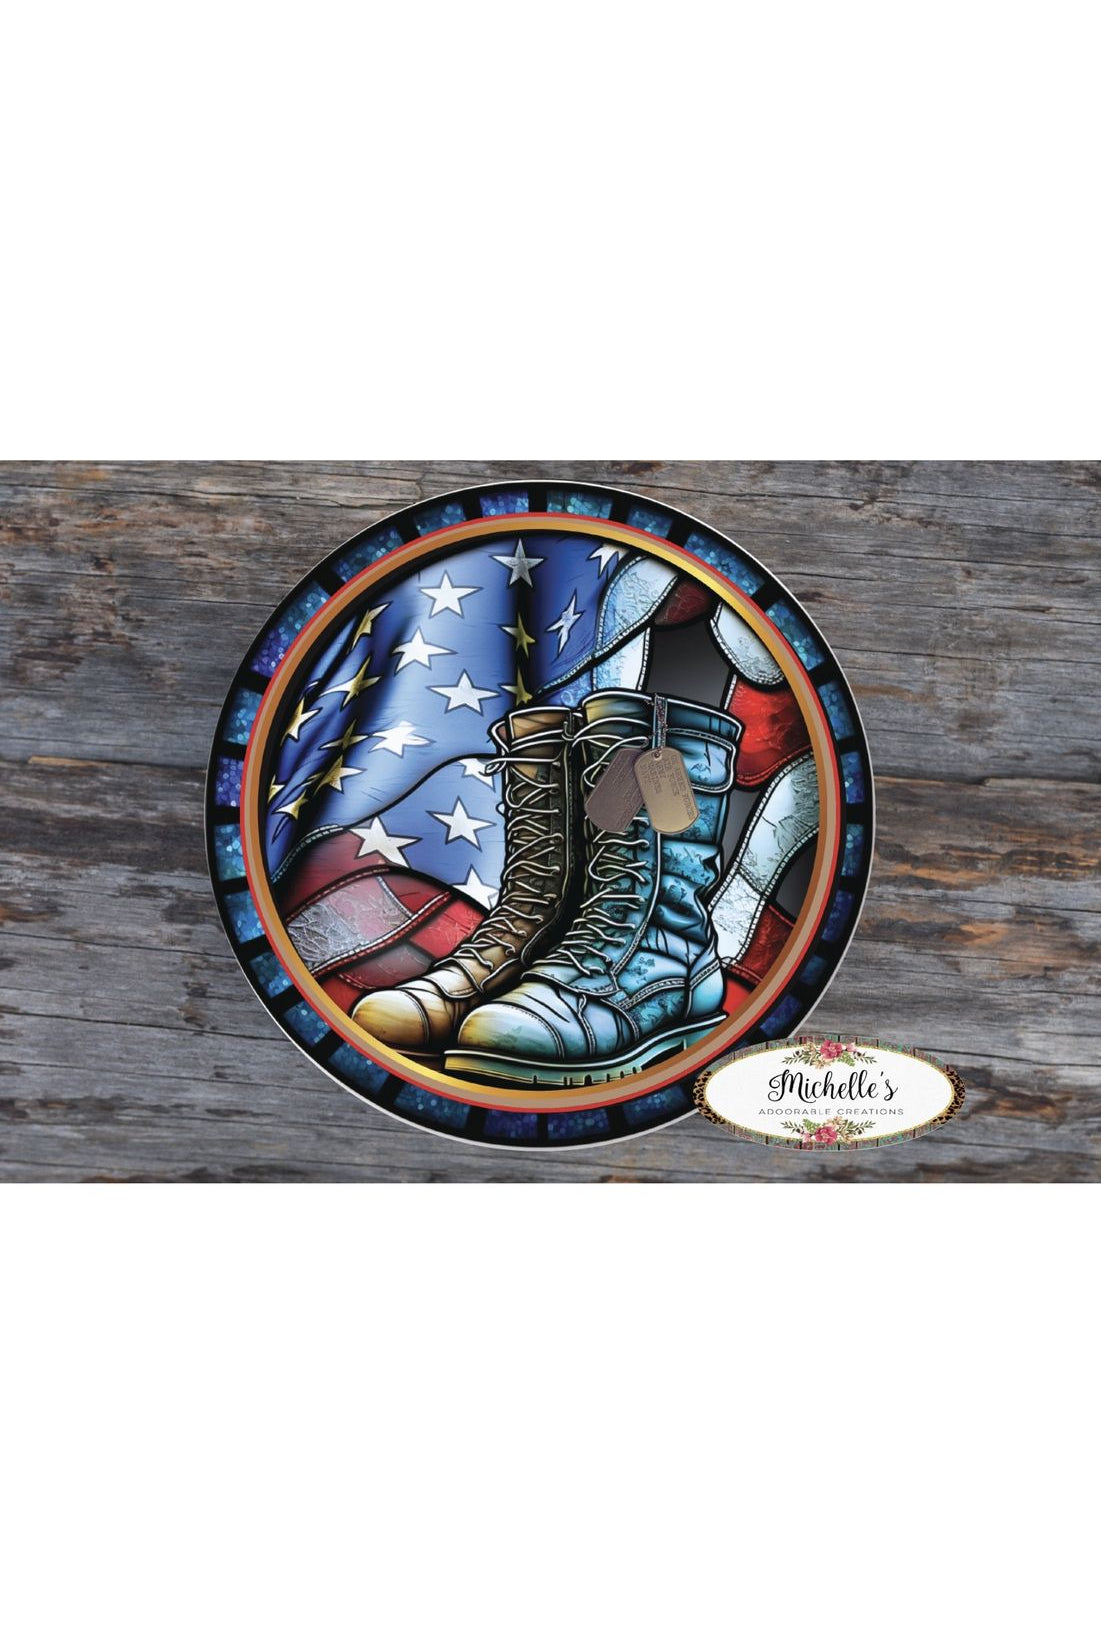 Shop For Faux Stained Glass Military Boots Sign - Wreath Enhancement